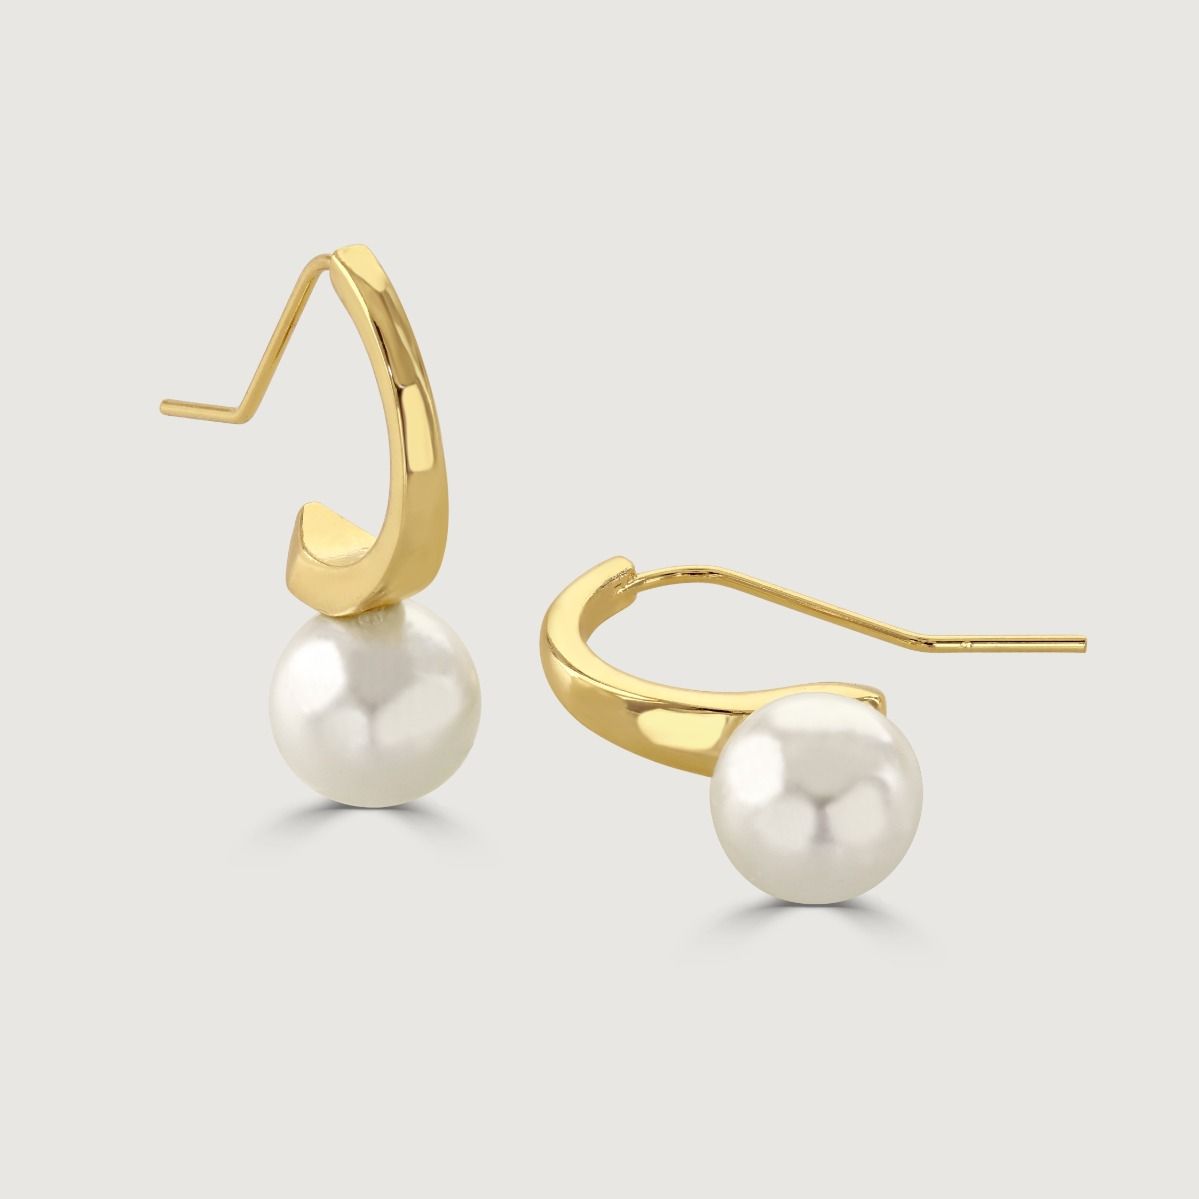 The Gold and Pearl Half Hoop Earrings are a perfect blend of classic and modern elegance. Featuring a gleaming gold half hoop design adorned with lustrous pearls, these earrings exude sophistication and femininity. The combination of gold and pearls creat